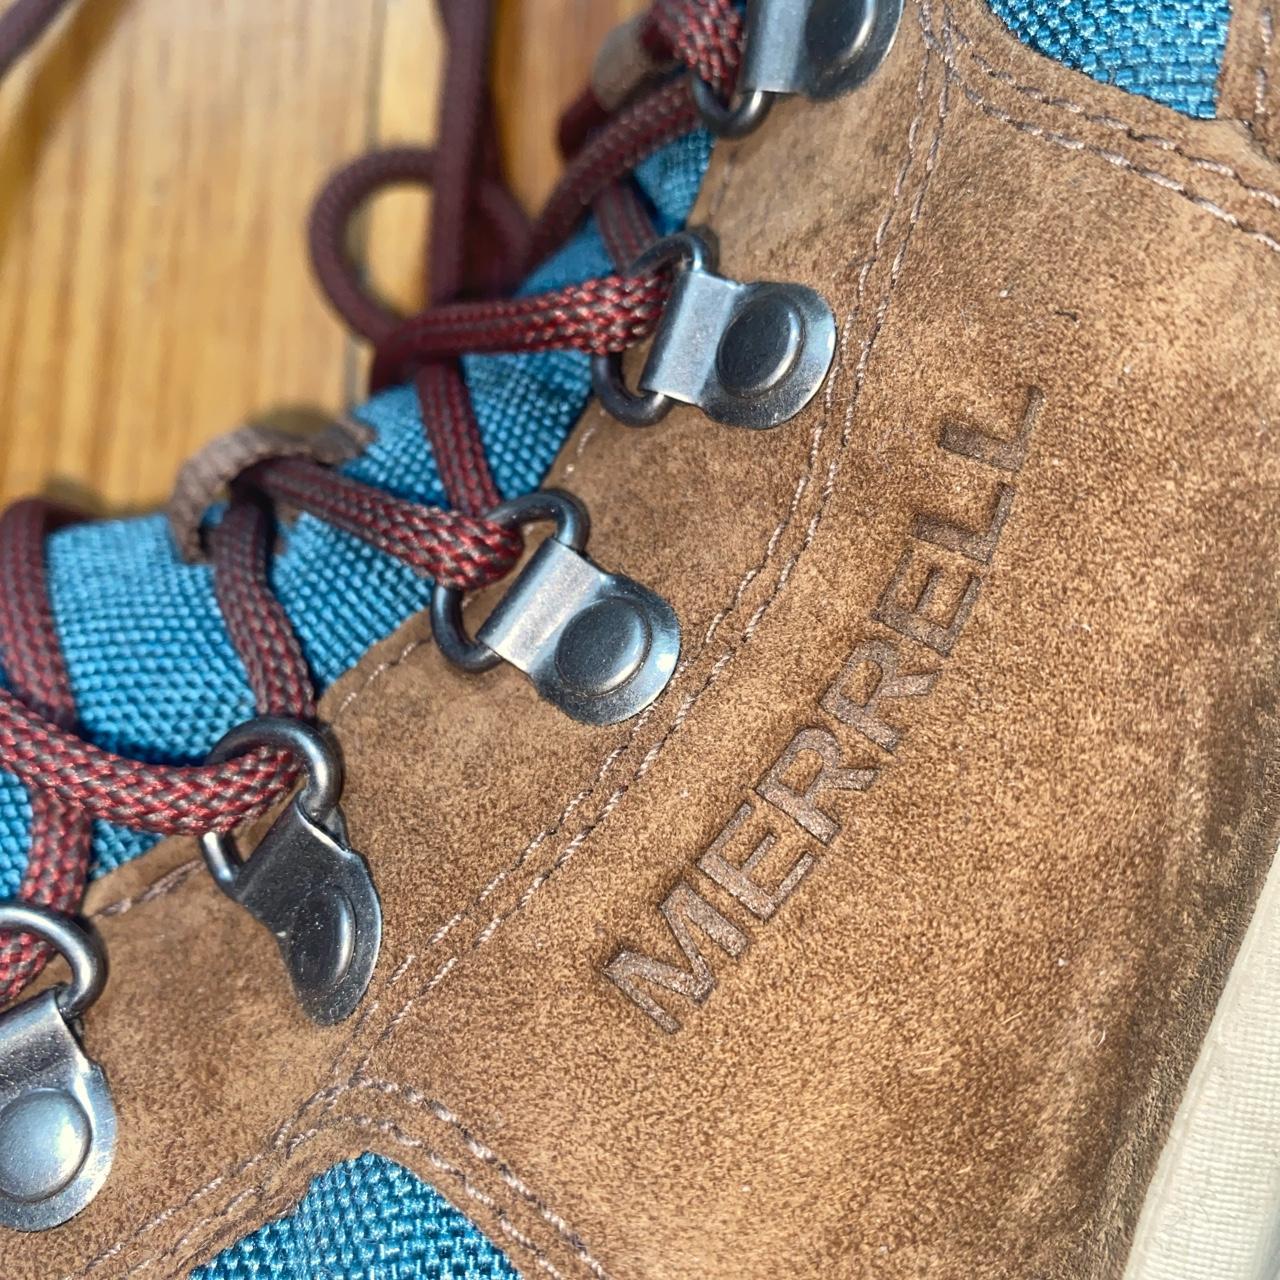 Merrell Women's Blue and Brown Trainers (2)